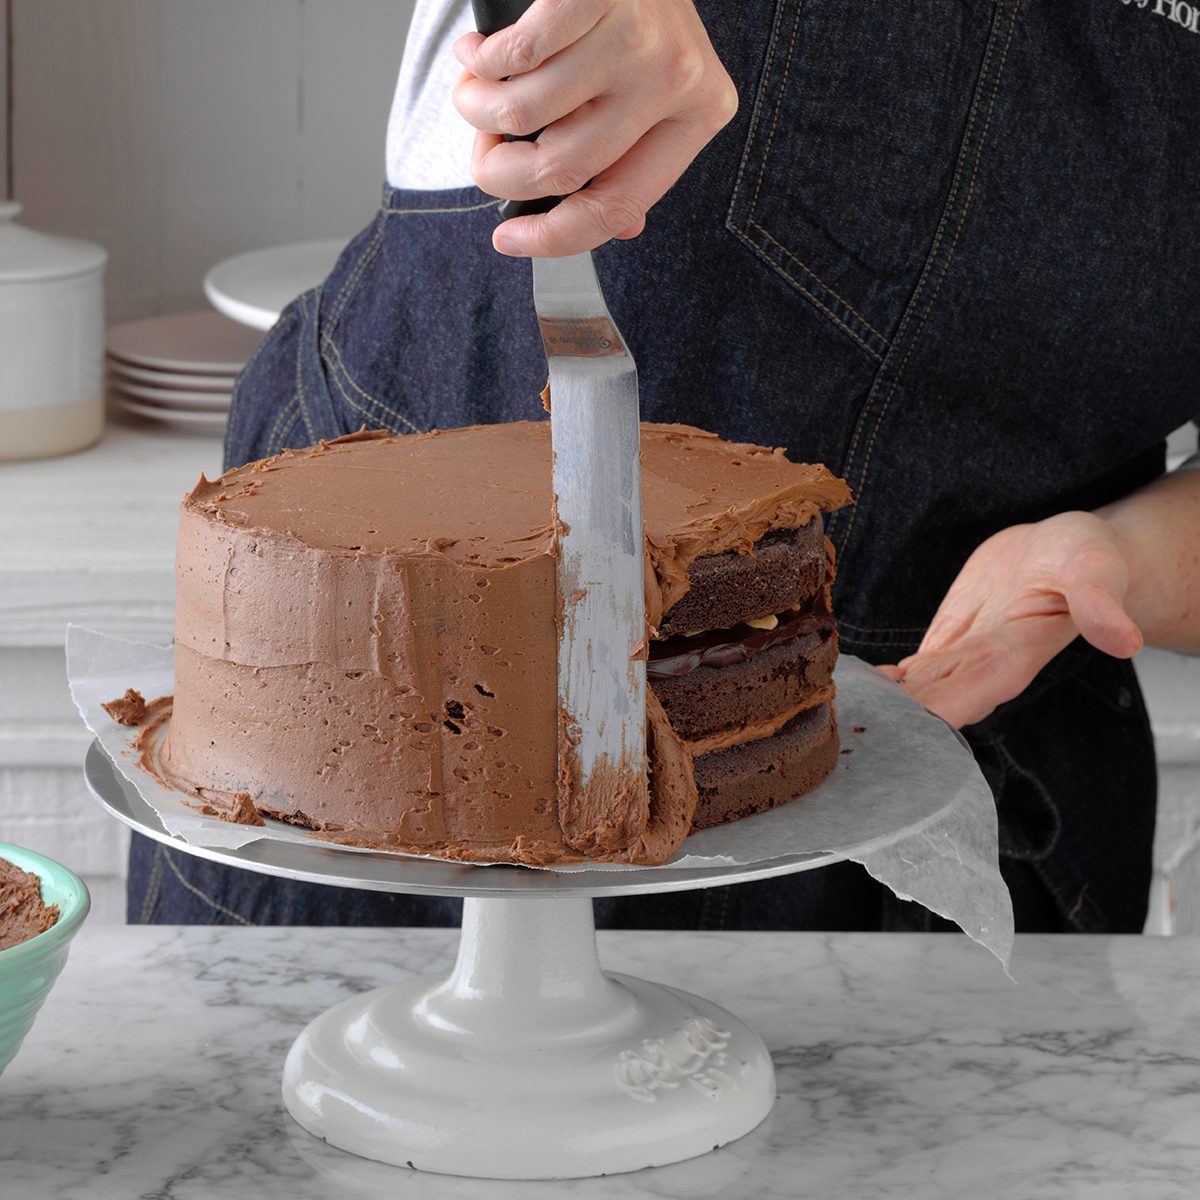 13 Cake Frosting Tips That Will Definitely Come In Handy Taste Of Home